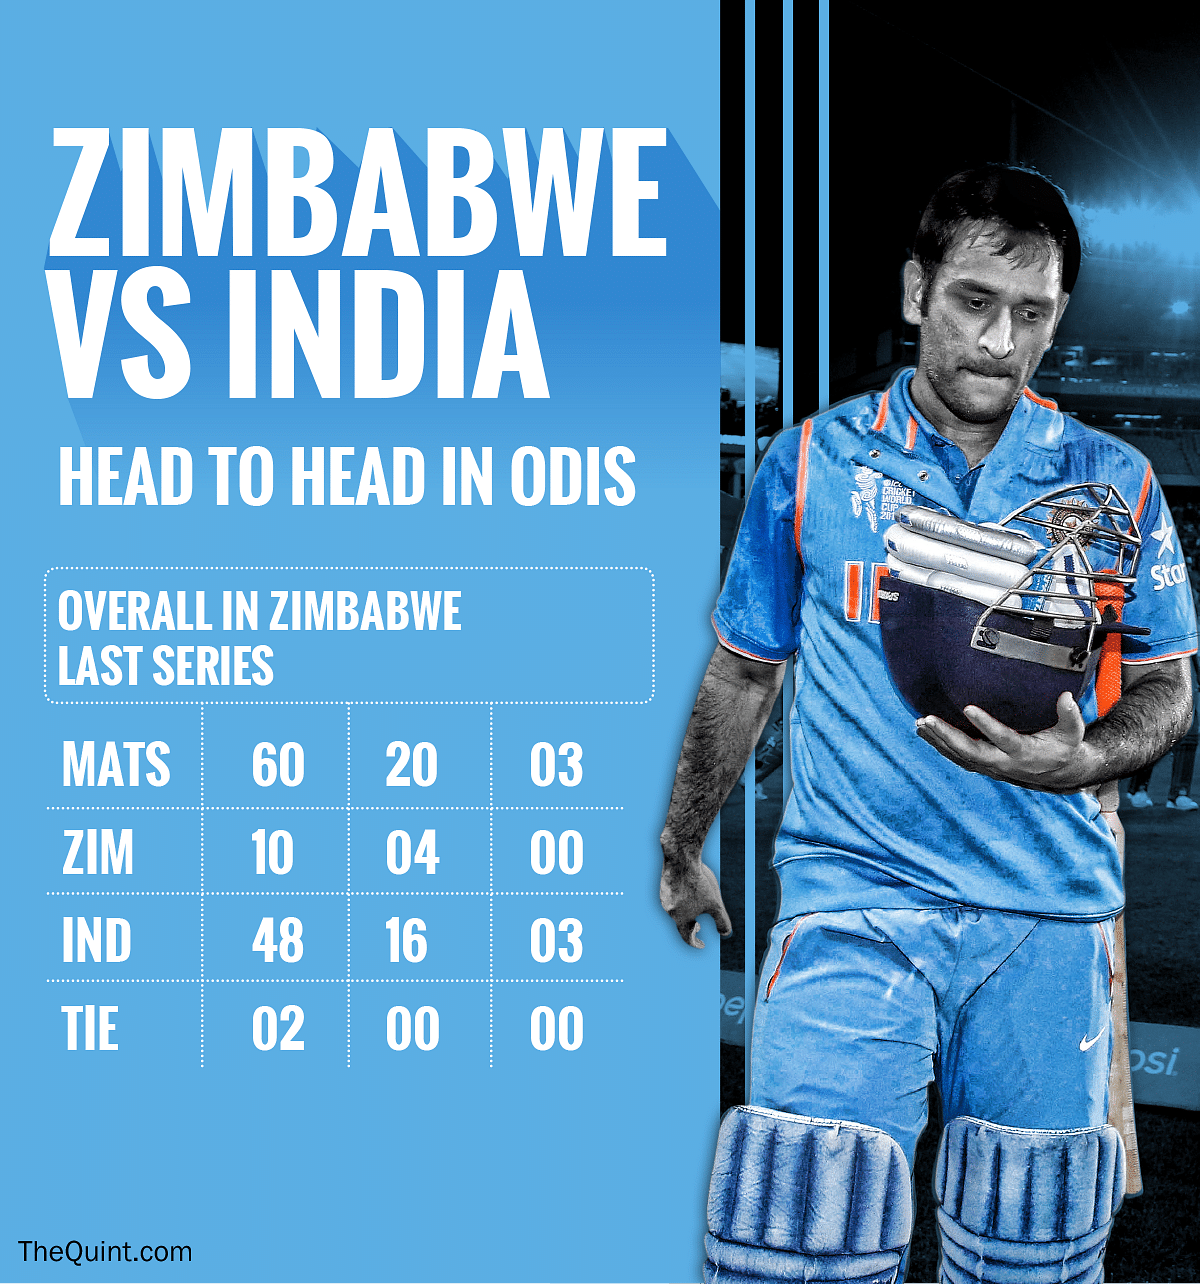 MS Dhoni will be up against new challenges in India’s tour of Zimbabwe, which begins on Saturday.